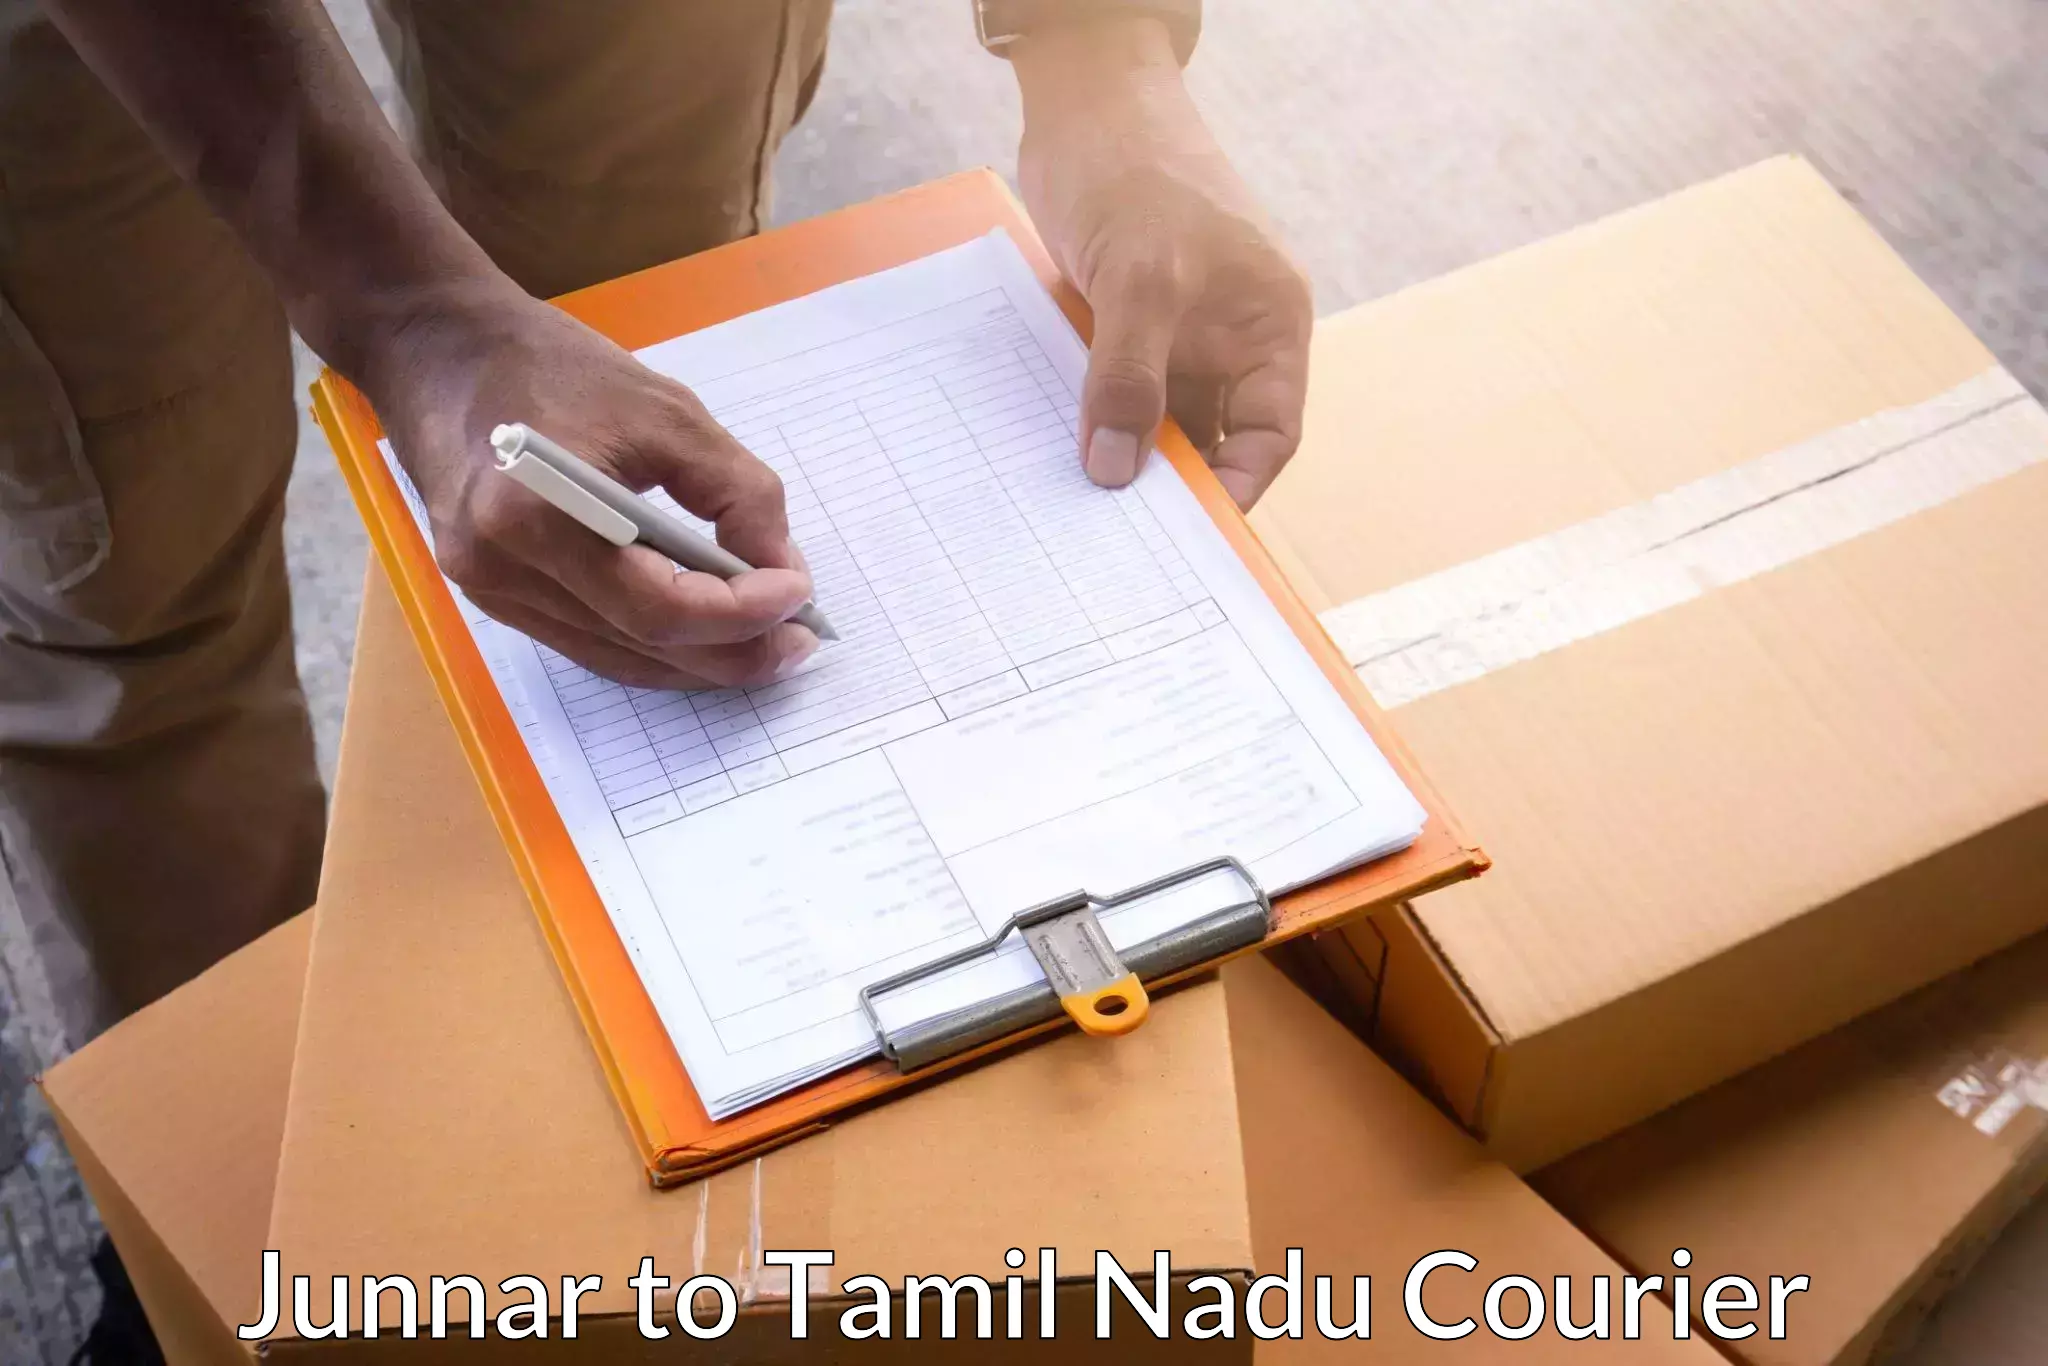 Courier membership Junnar to Vellore